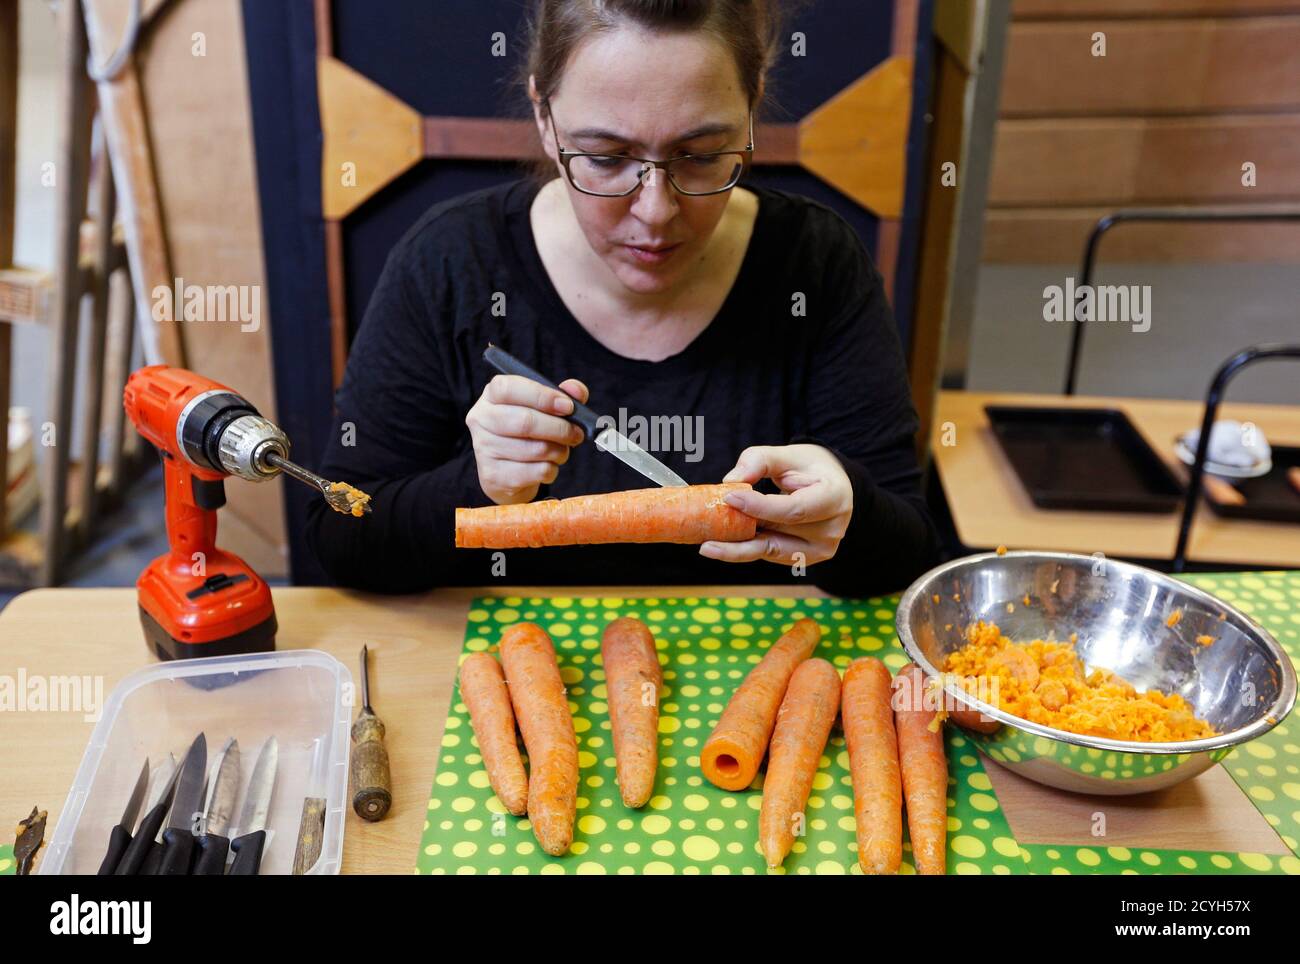 Austrian musician Barbara Kaiser, who is a member of the Vegetable  Orchestra, makes a musical instrument from a carrot during the preparations  for a concert in Haguenau, eastern France January 15, 2014.